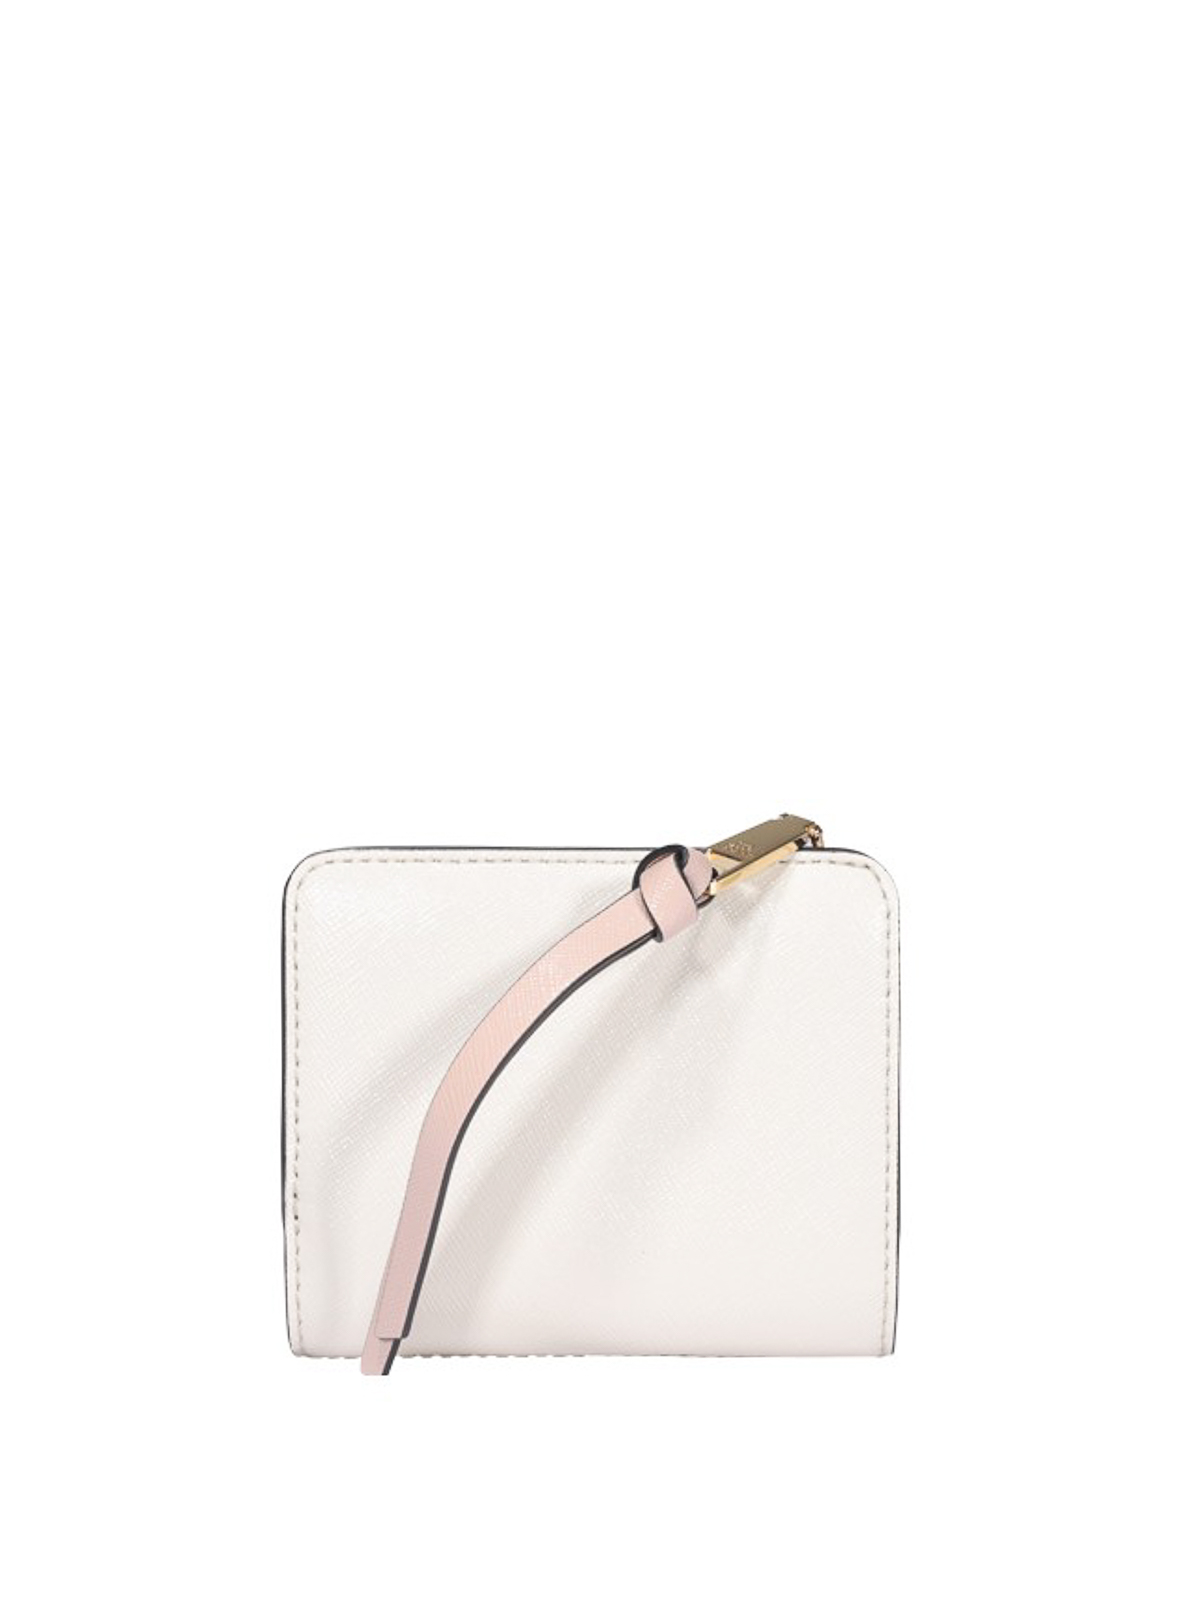 Marc Jacobs the utility snapshot mini compact wallet - ShopStyle